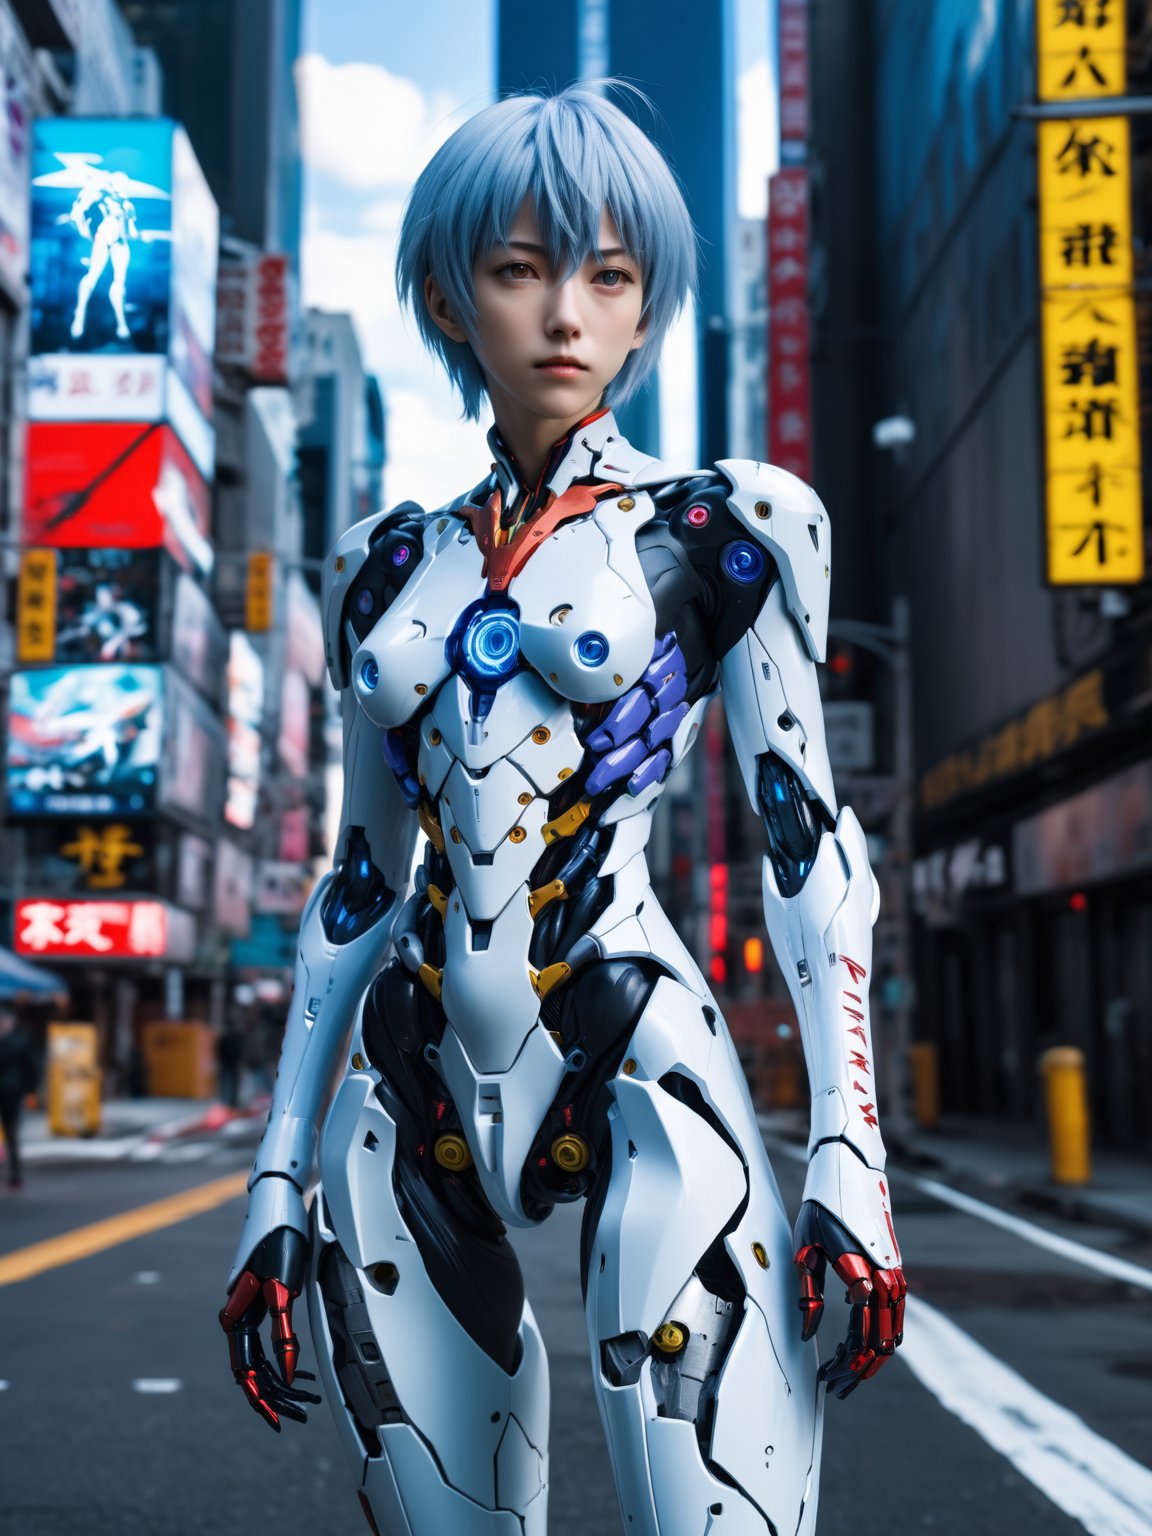 ultra highly intricate detailed 8k, UHD, professional photo, world's most beautiful cyborg ayanami rei in evangelion, street fashion model, cyberpunk 2077, new york street, natural light